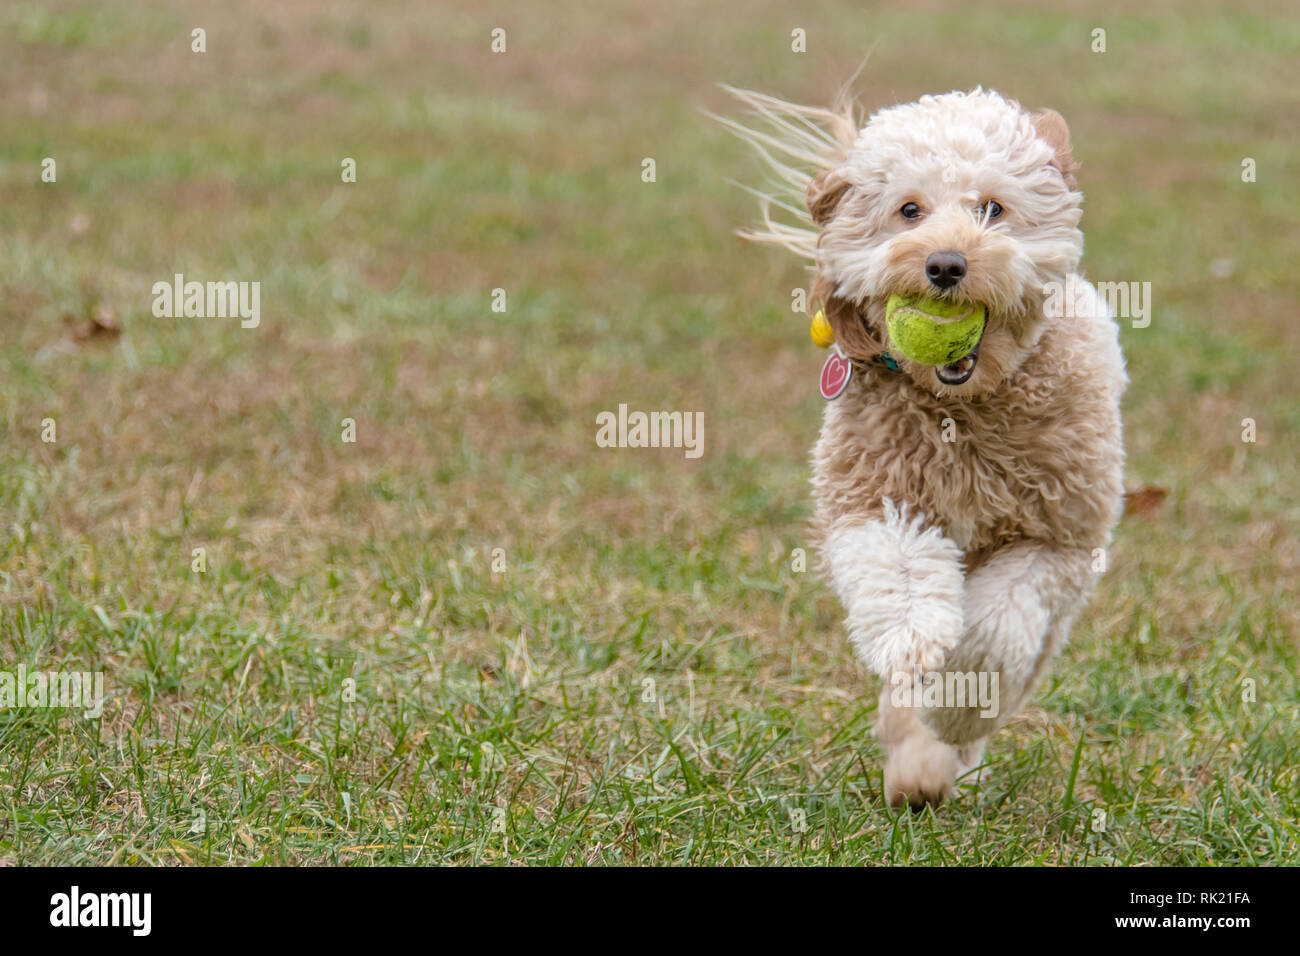 Purebred mini golden doodle running on the loan with a tennis ball in the mouth. Stock Photo